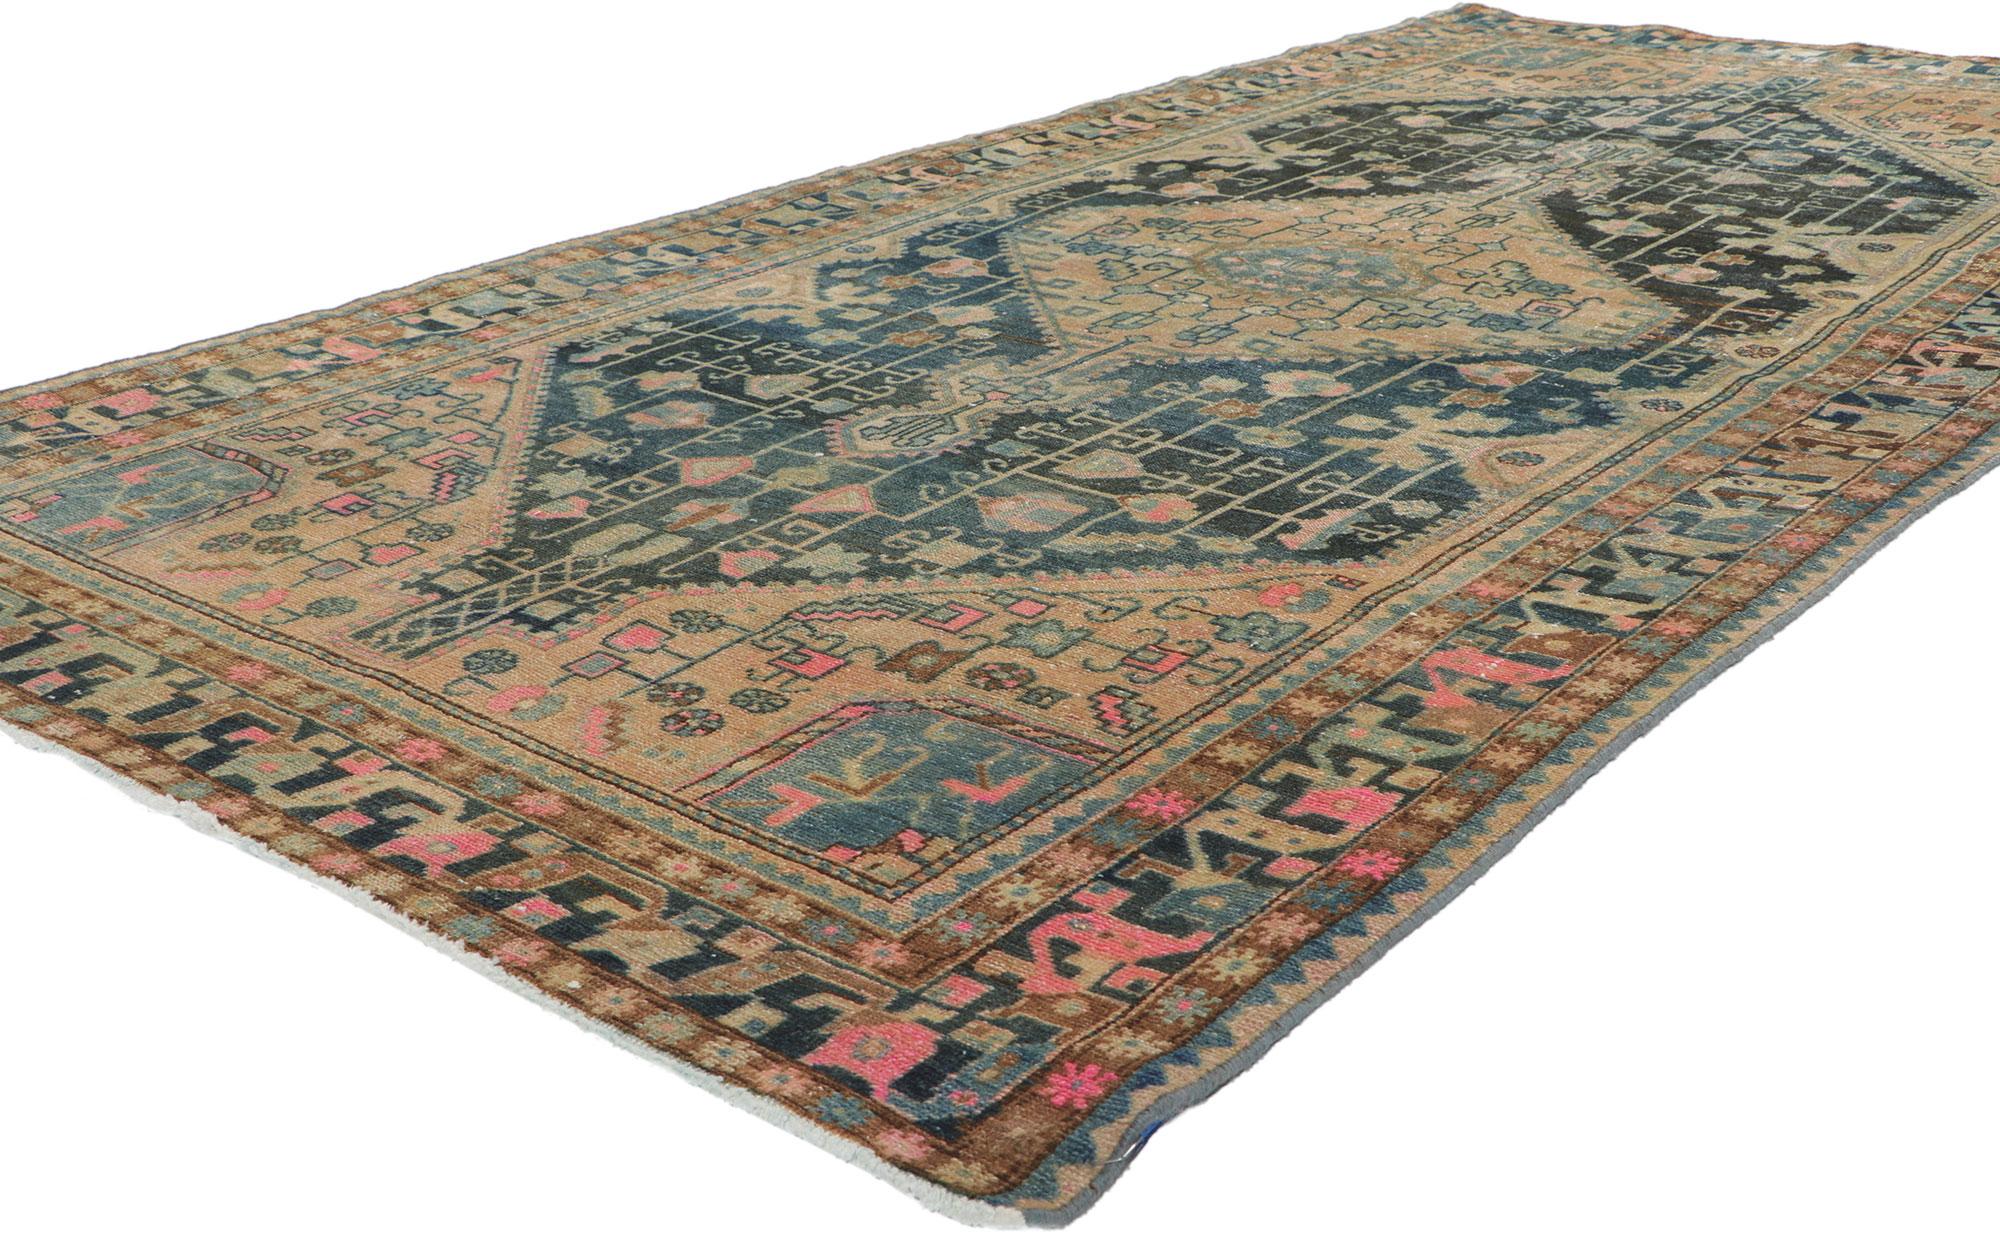 60957 Distressed Antique-Worn Persian Malayer Rug, 04'07 x 08'09.
Prepare to be transported to a mystical realm of captivating wonder summoning visions of ancient enchantments with this hand knotted wool antique Persian Malayer rug appearing as your